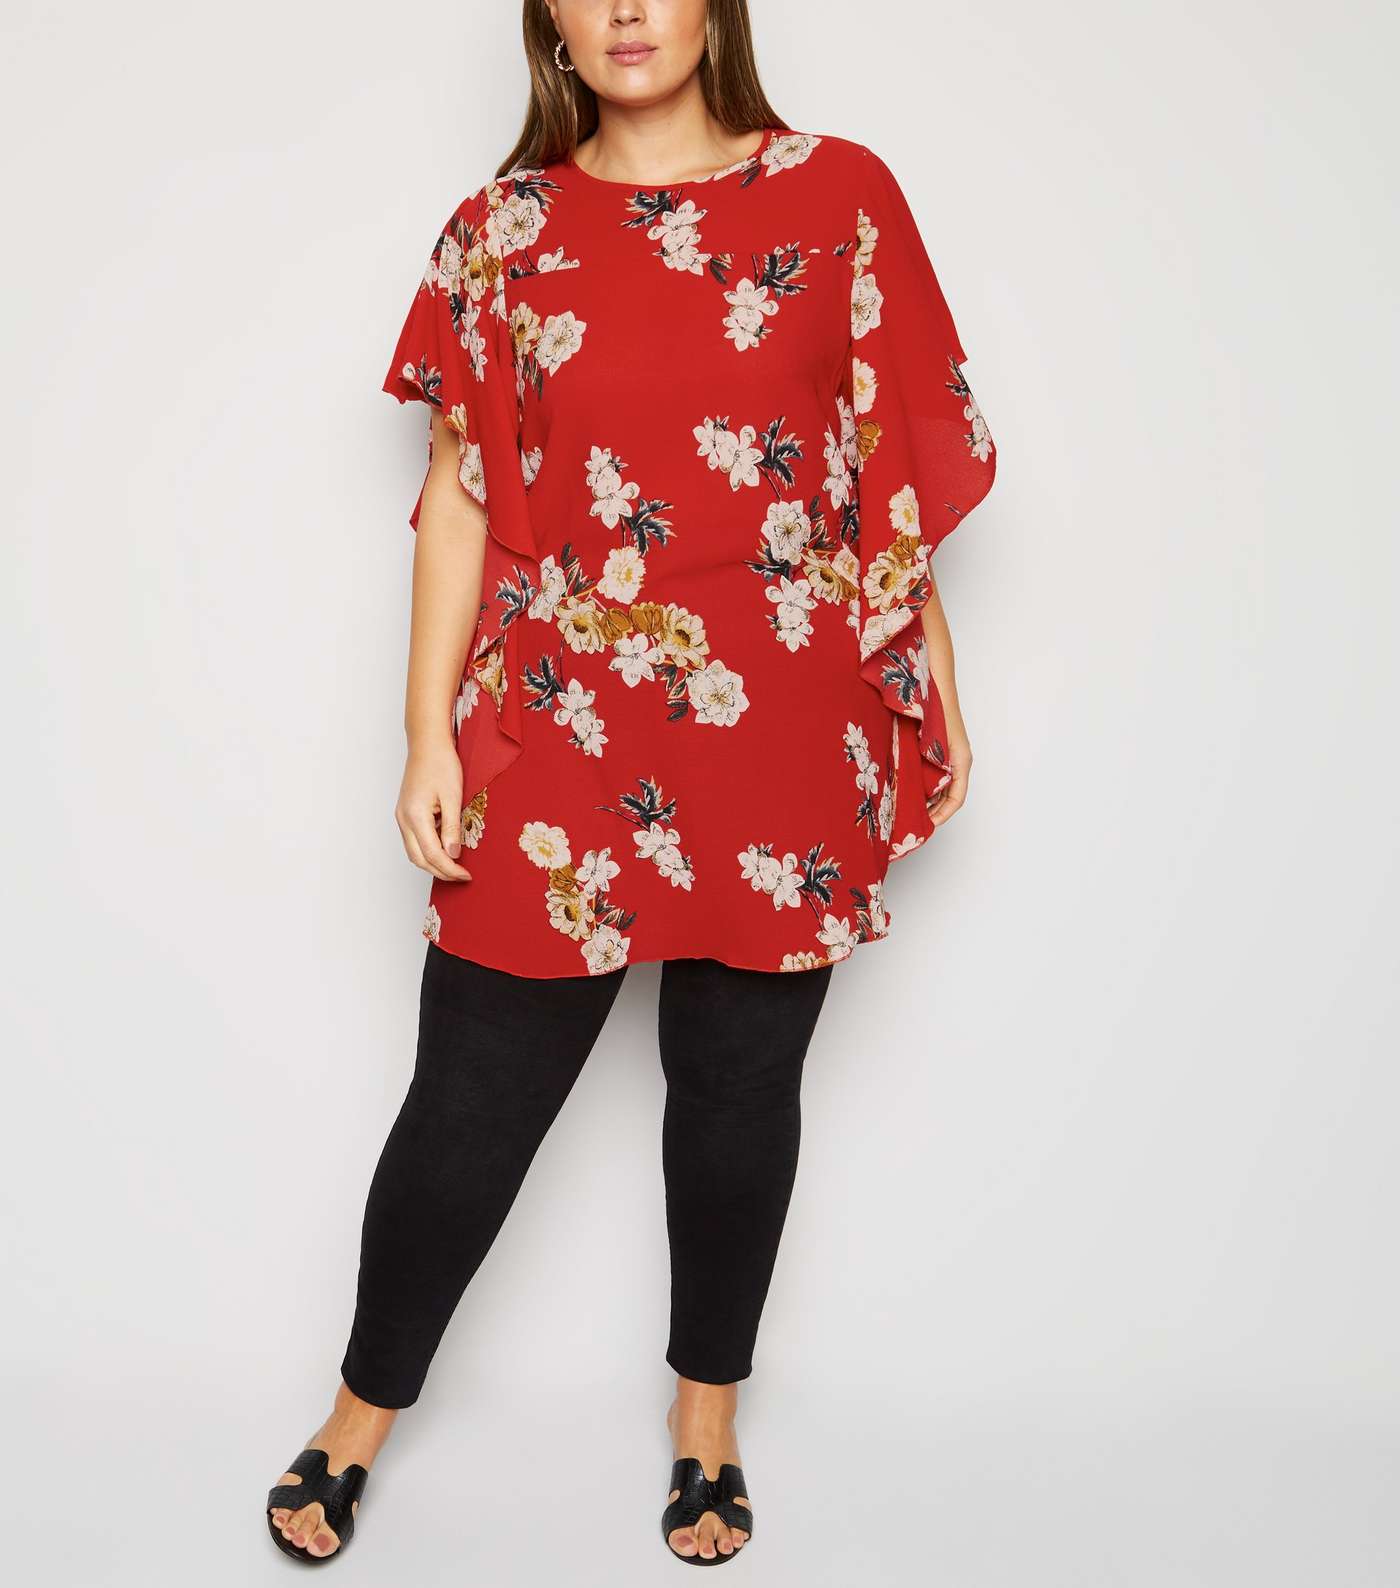 Mela Curves Red Floral Waterfall Sleeve Blouse Image 2